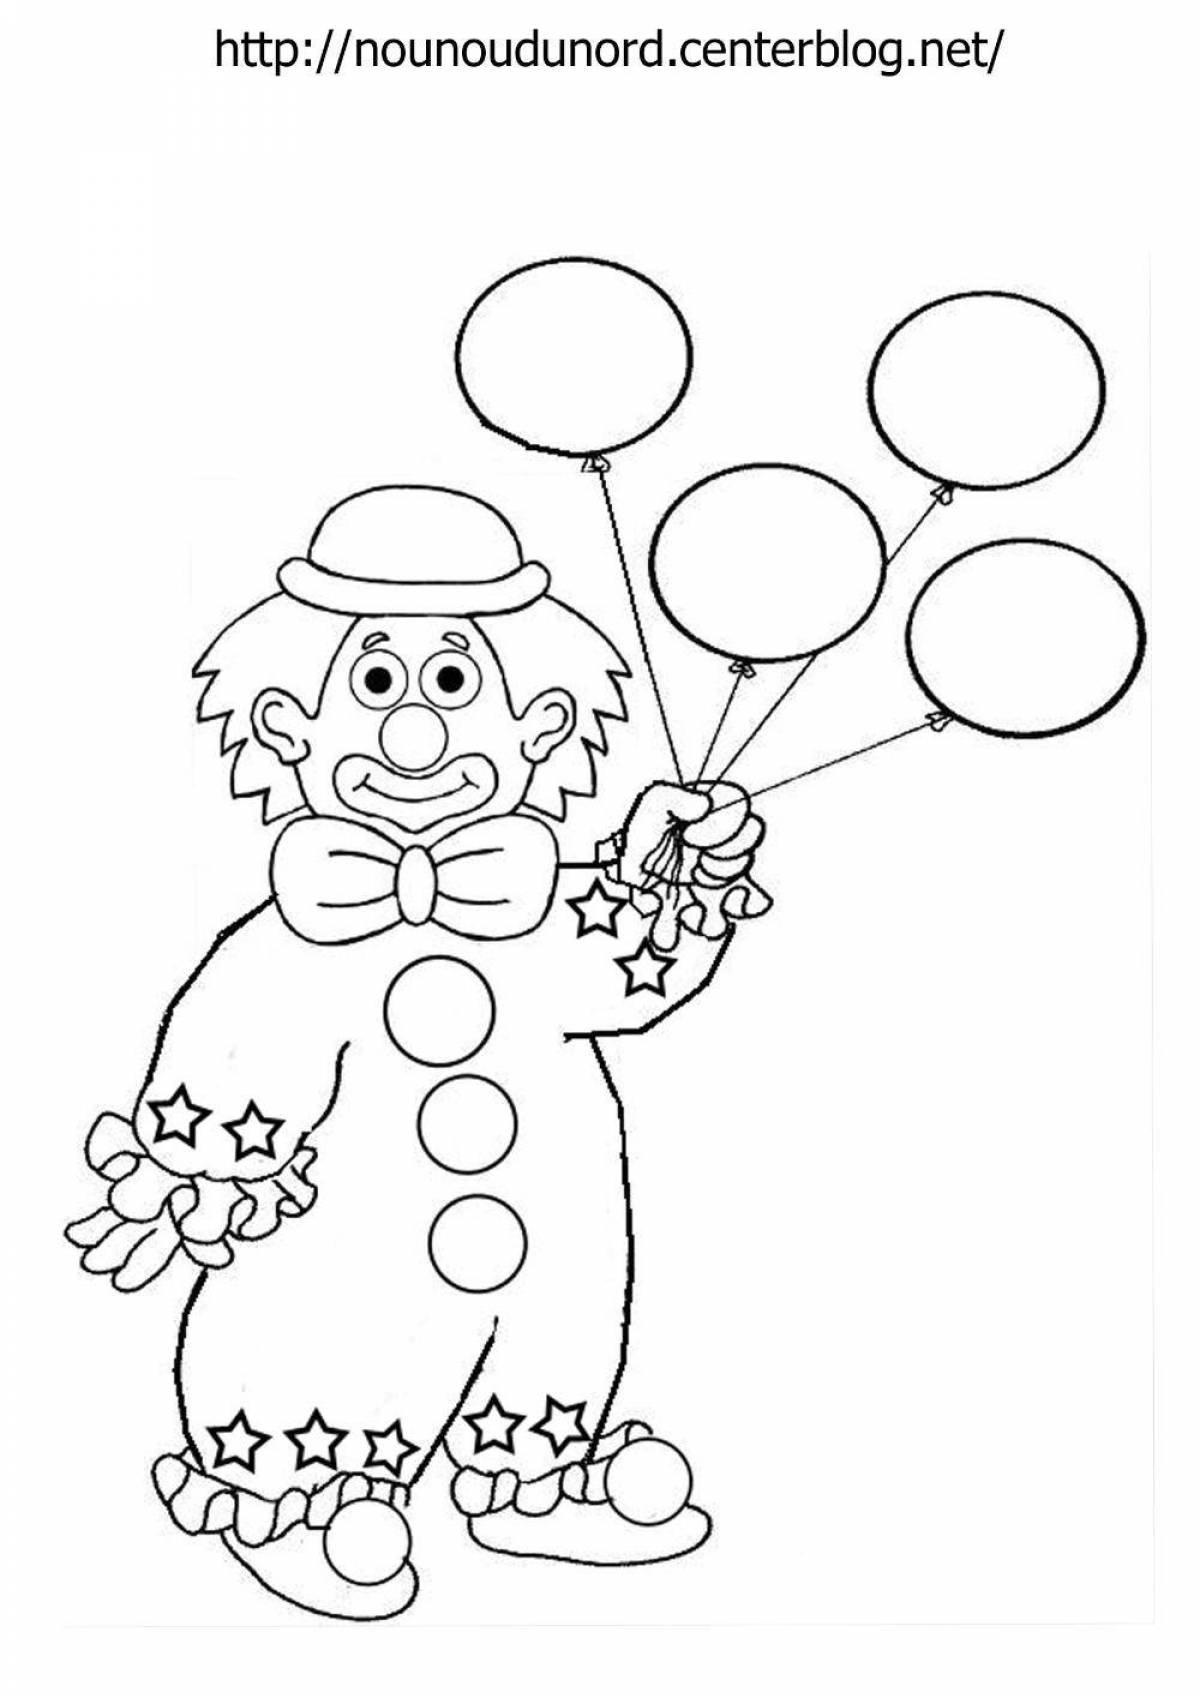 Animated clown with balloons